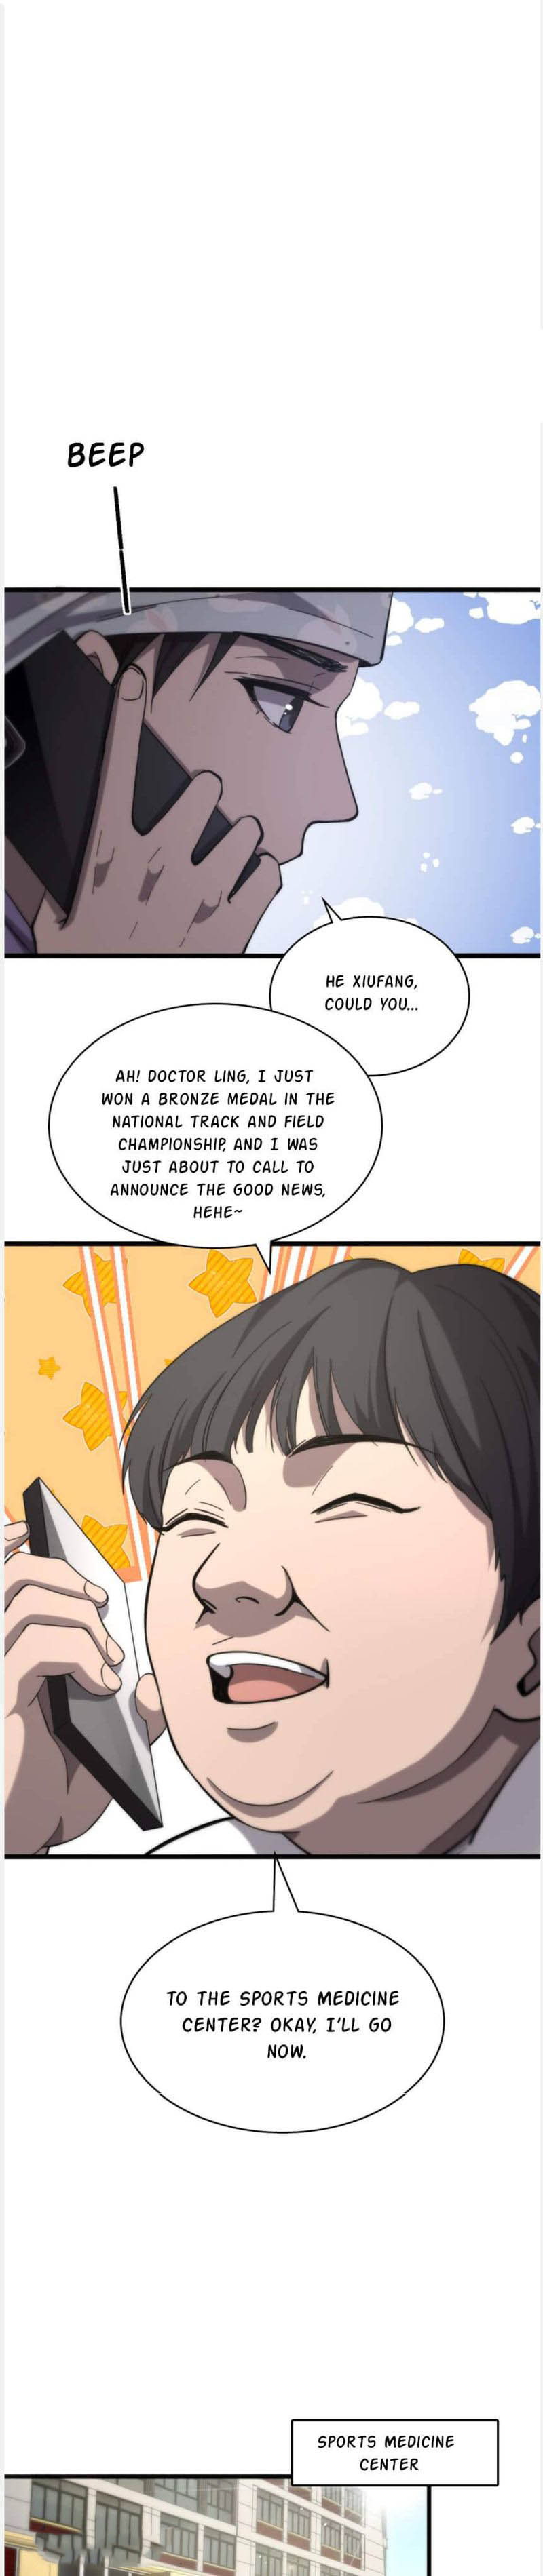 great_doctor_ling_ran_110_9